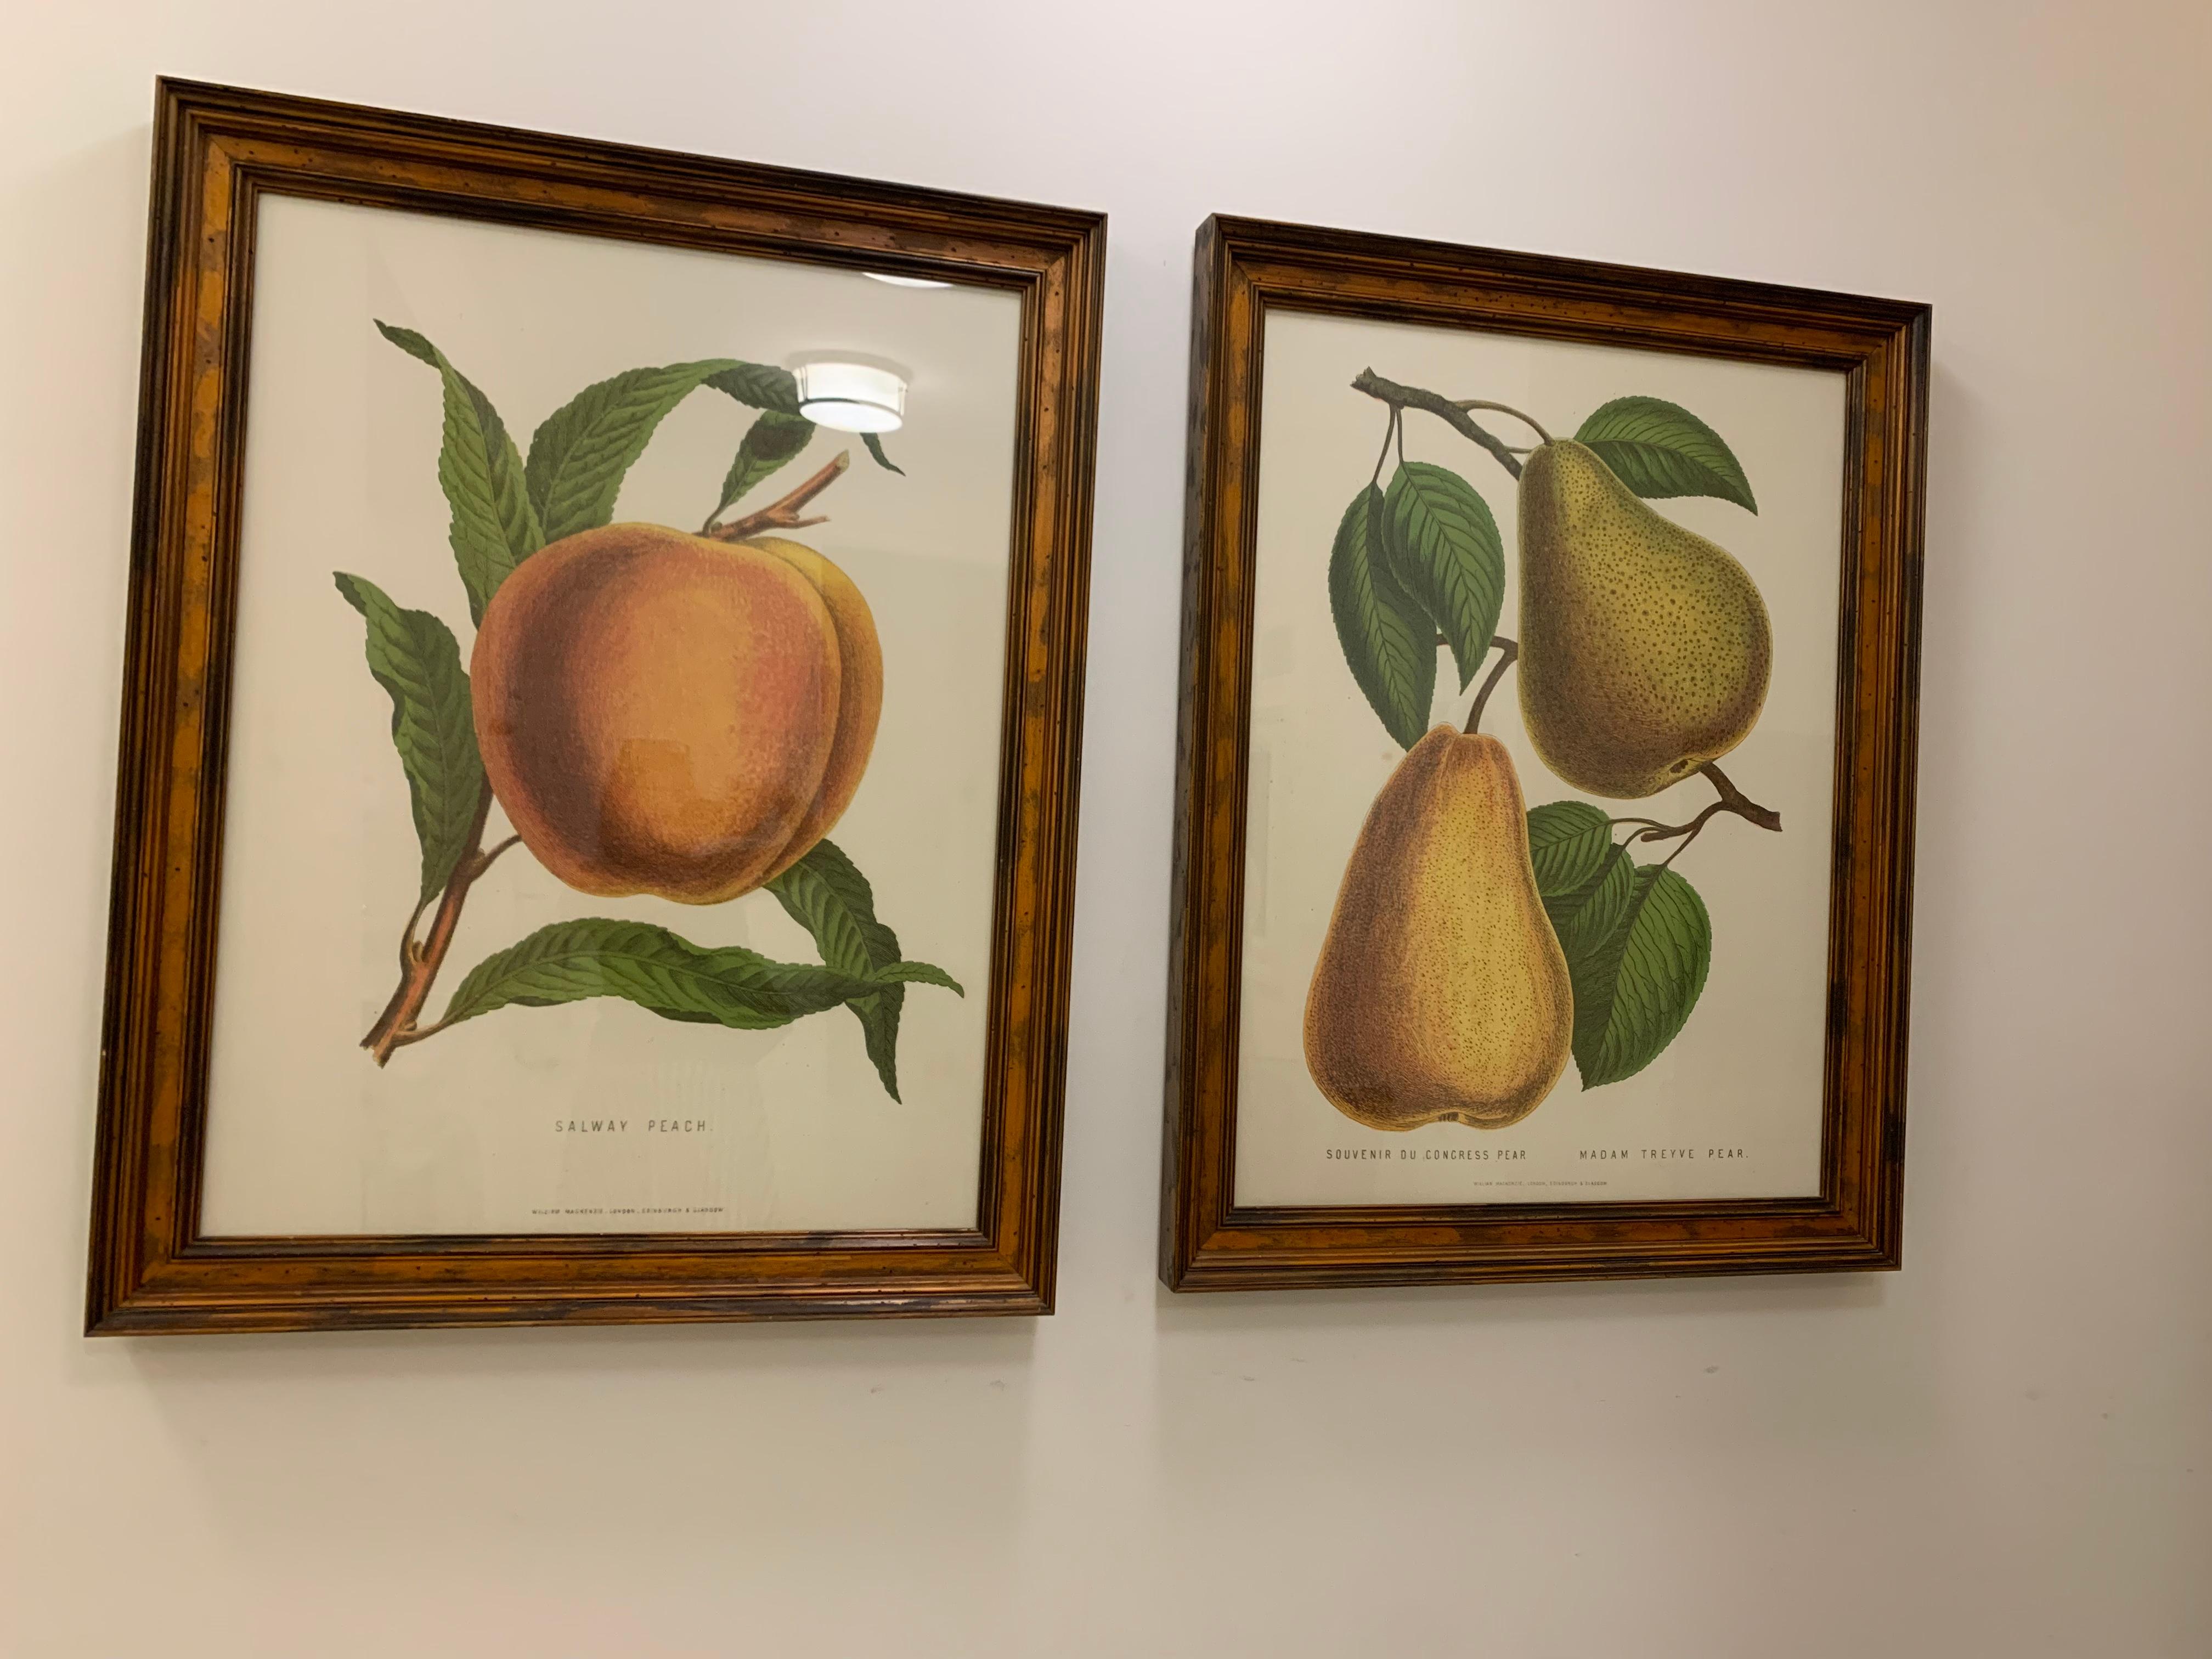 These chromolithographs are by the esteemed Belgian lithographer G. Severyns from illustrations by J Macfarlane and published by William Mackenzie of London Glasgow and Edinburgh. Presented in bespoke frames behind Tru Vu glass which cuts reflection